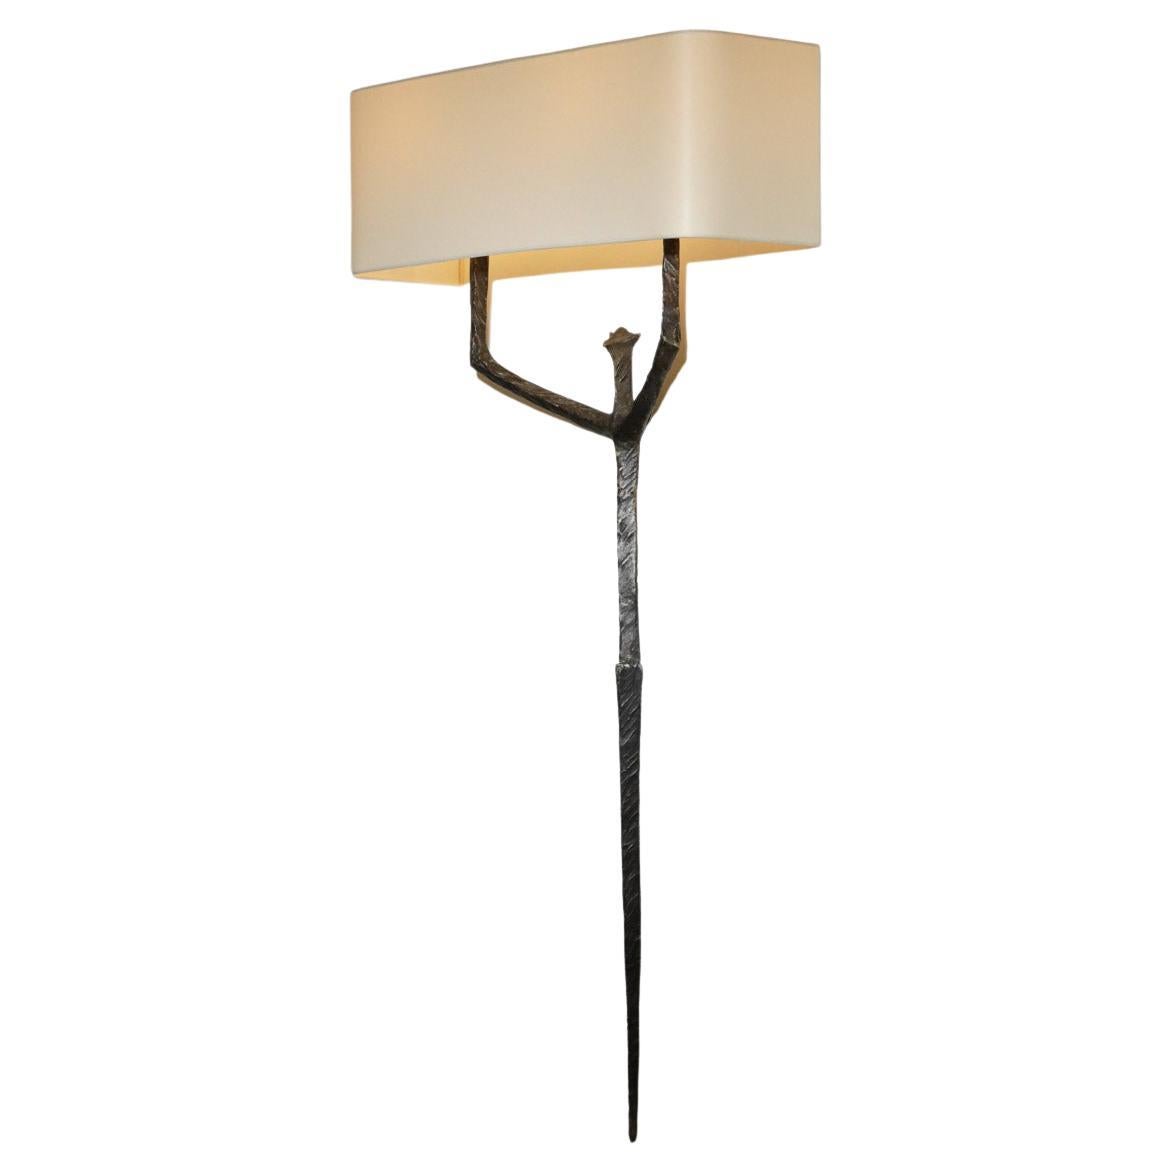 Very large wall lamp in the same style as its caryatid model created around 1950 by the designer and sculptor Felix Agostini. Wall lamp of the art deco period in solid bronze. Shade and electrical system refurbished, we recommend two LED bulbs type